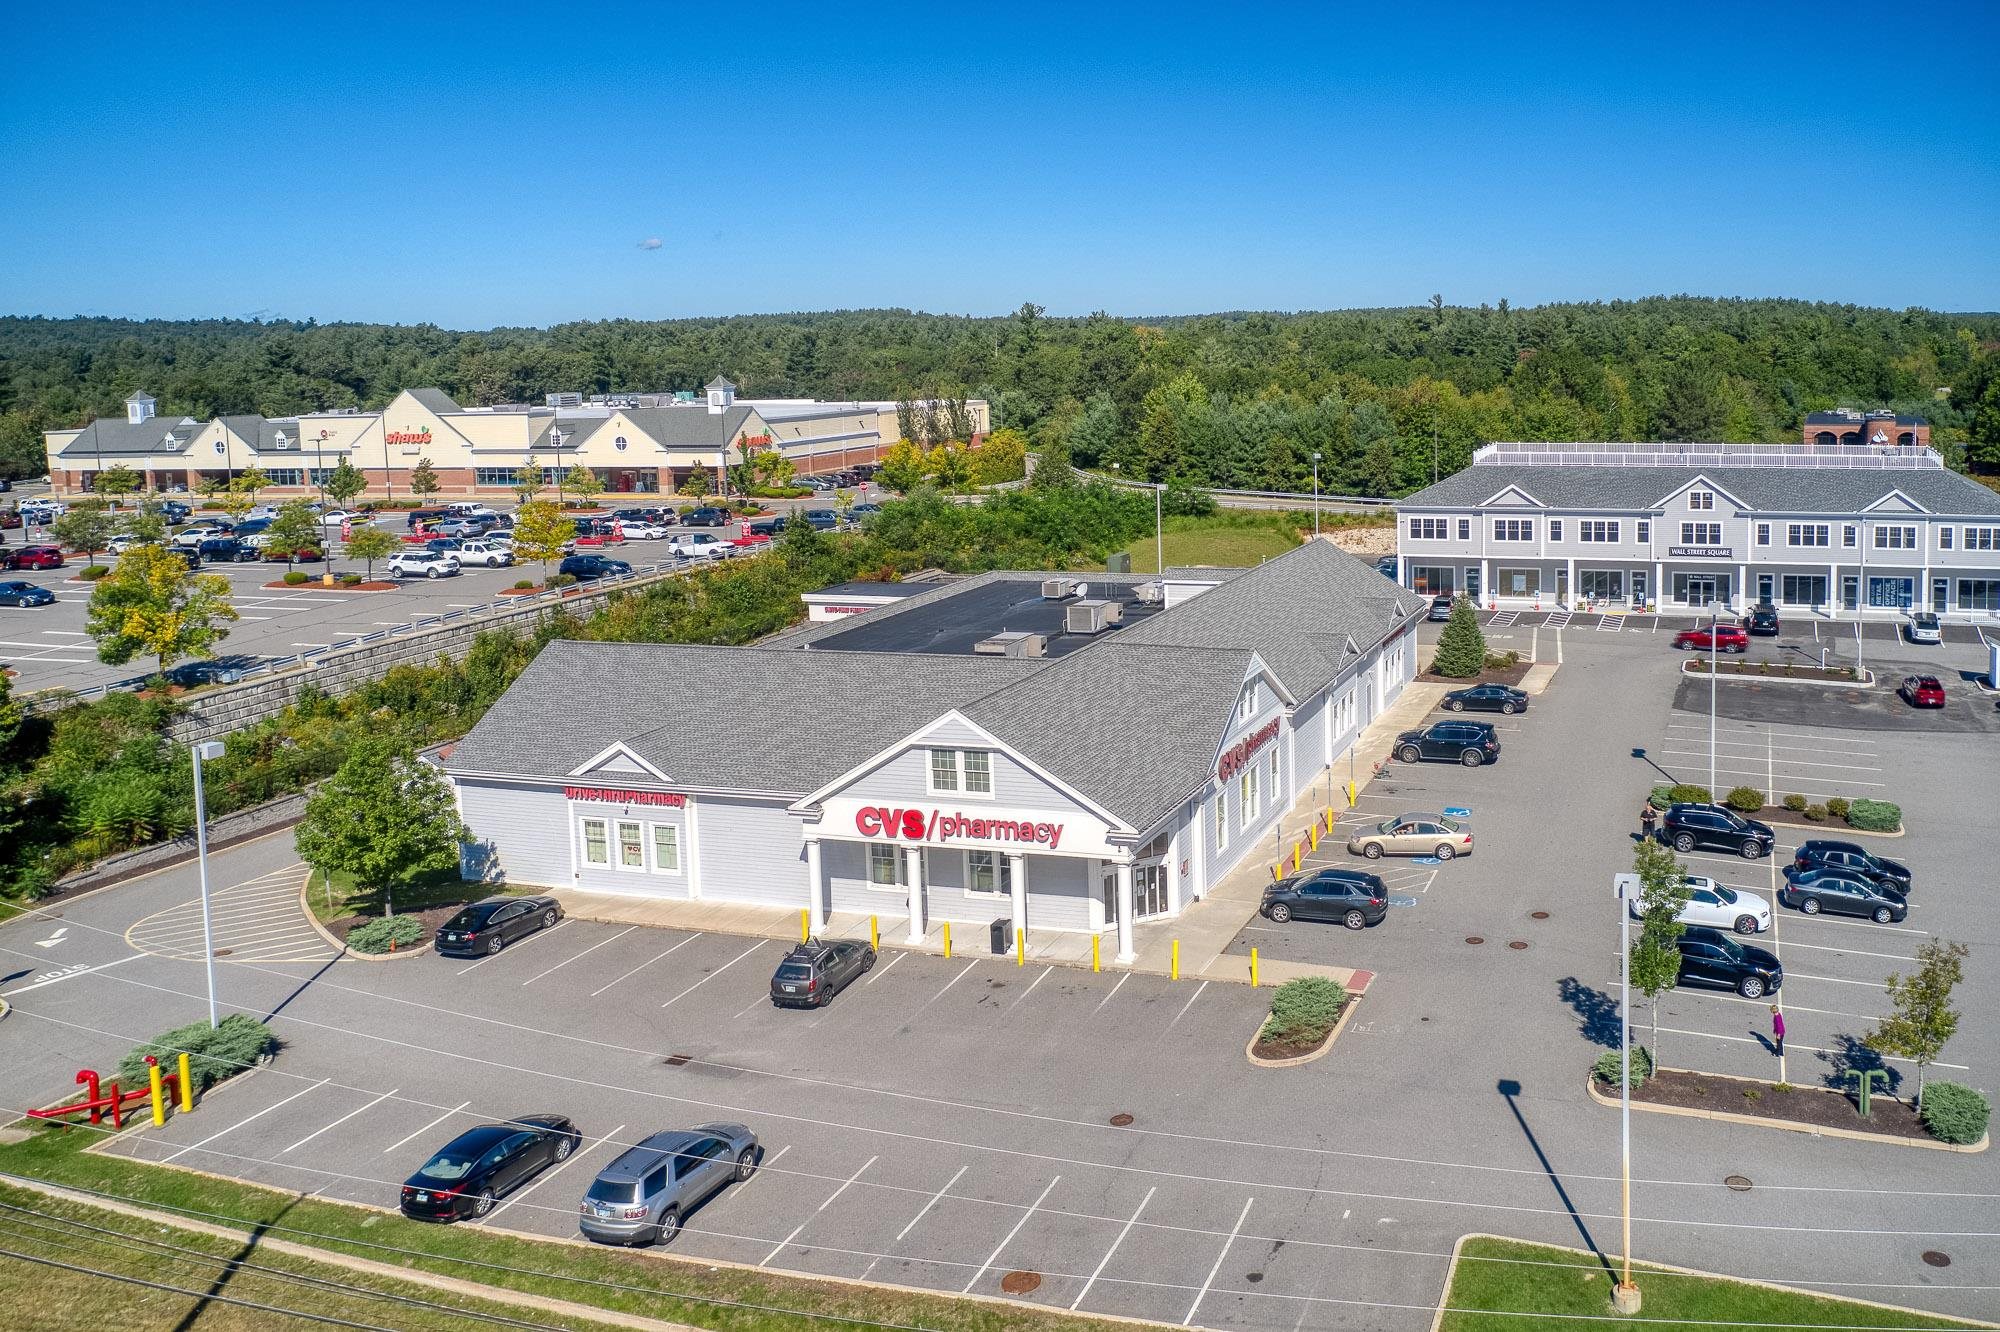 MLS 4948666: 1 Wall Street-Unit Divisible Office Suites, Windham NH